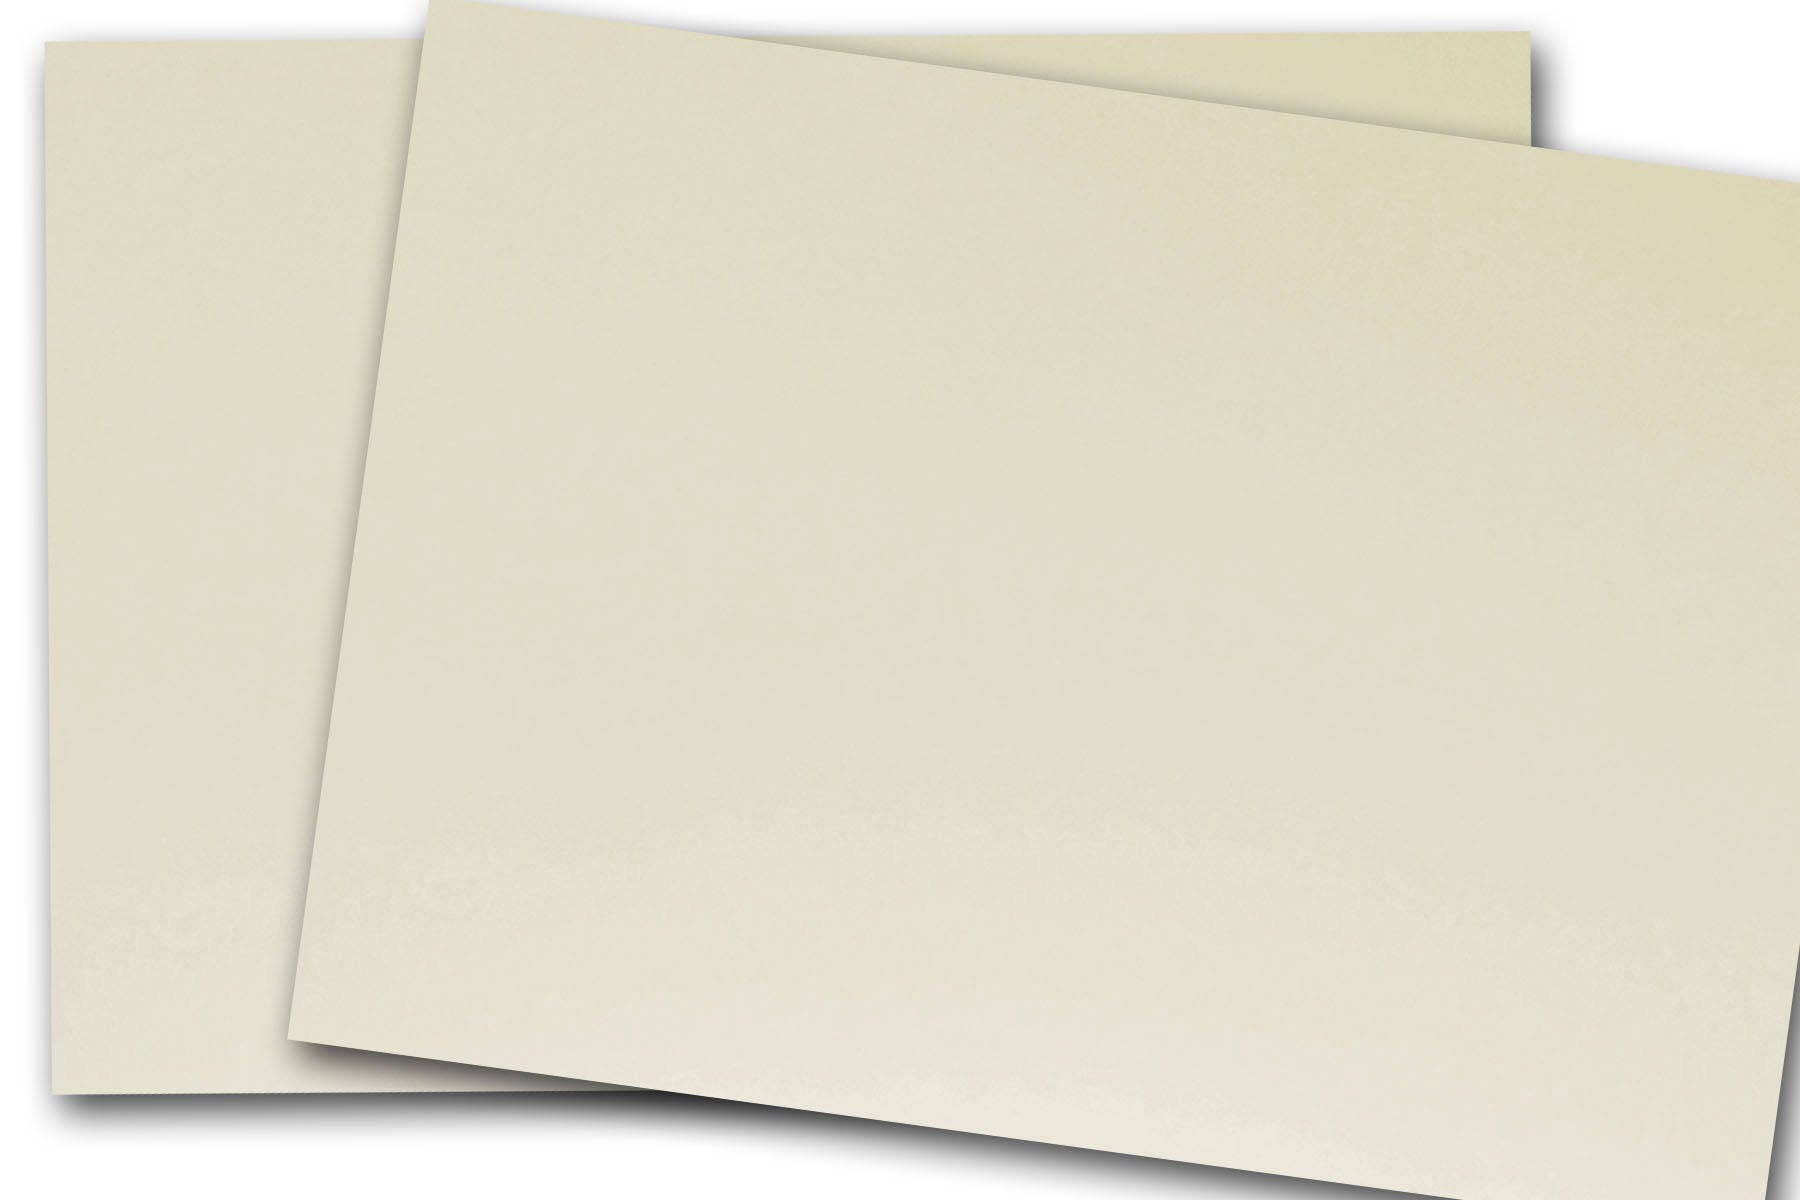 100 Sheets of White Card Stock Paper - 80 lb. Paperweight Cover - 8.5 x 11  Paper